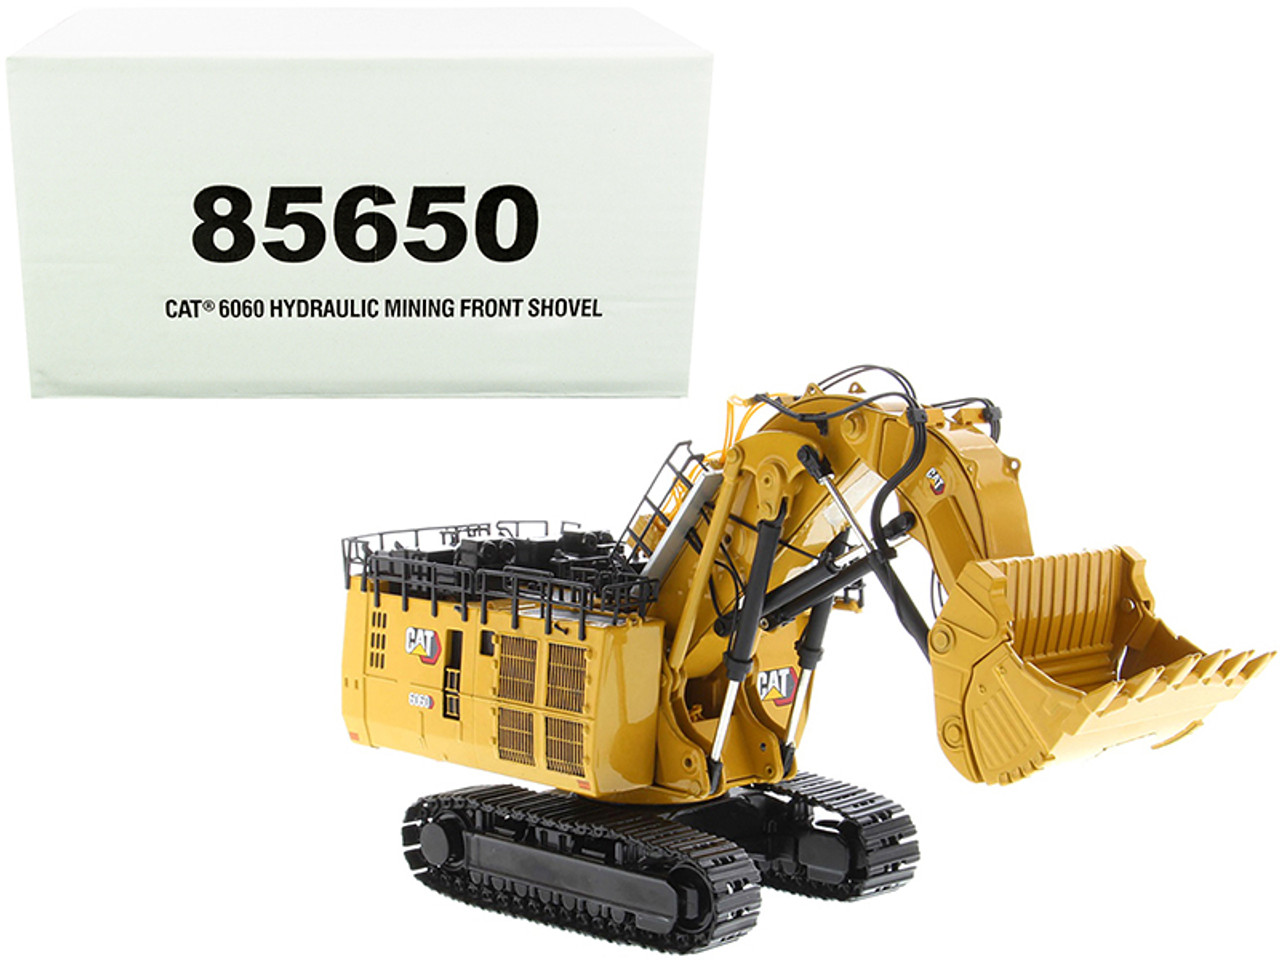 CAT Caterpillar 6060 Hydraulic Mining Front Shovel "High Line Series" 1/87 (HO) Diecast Model by Diecast Masters